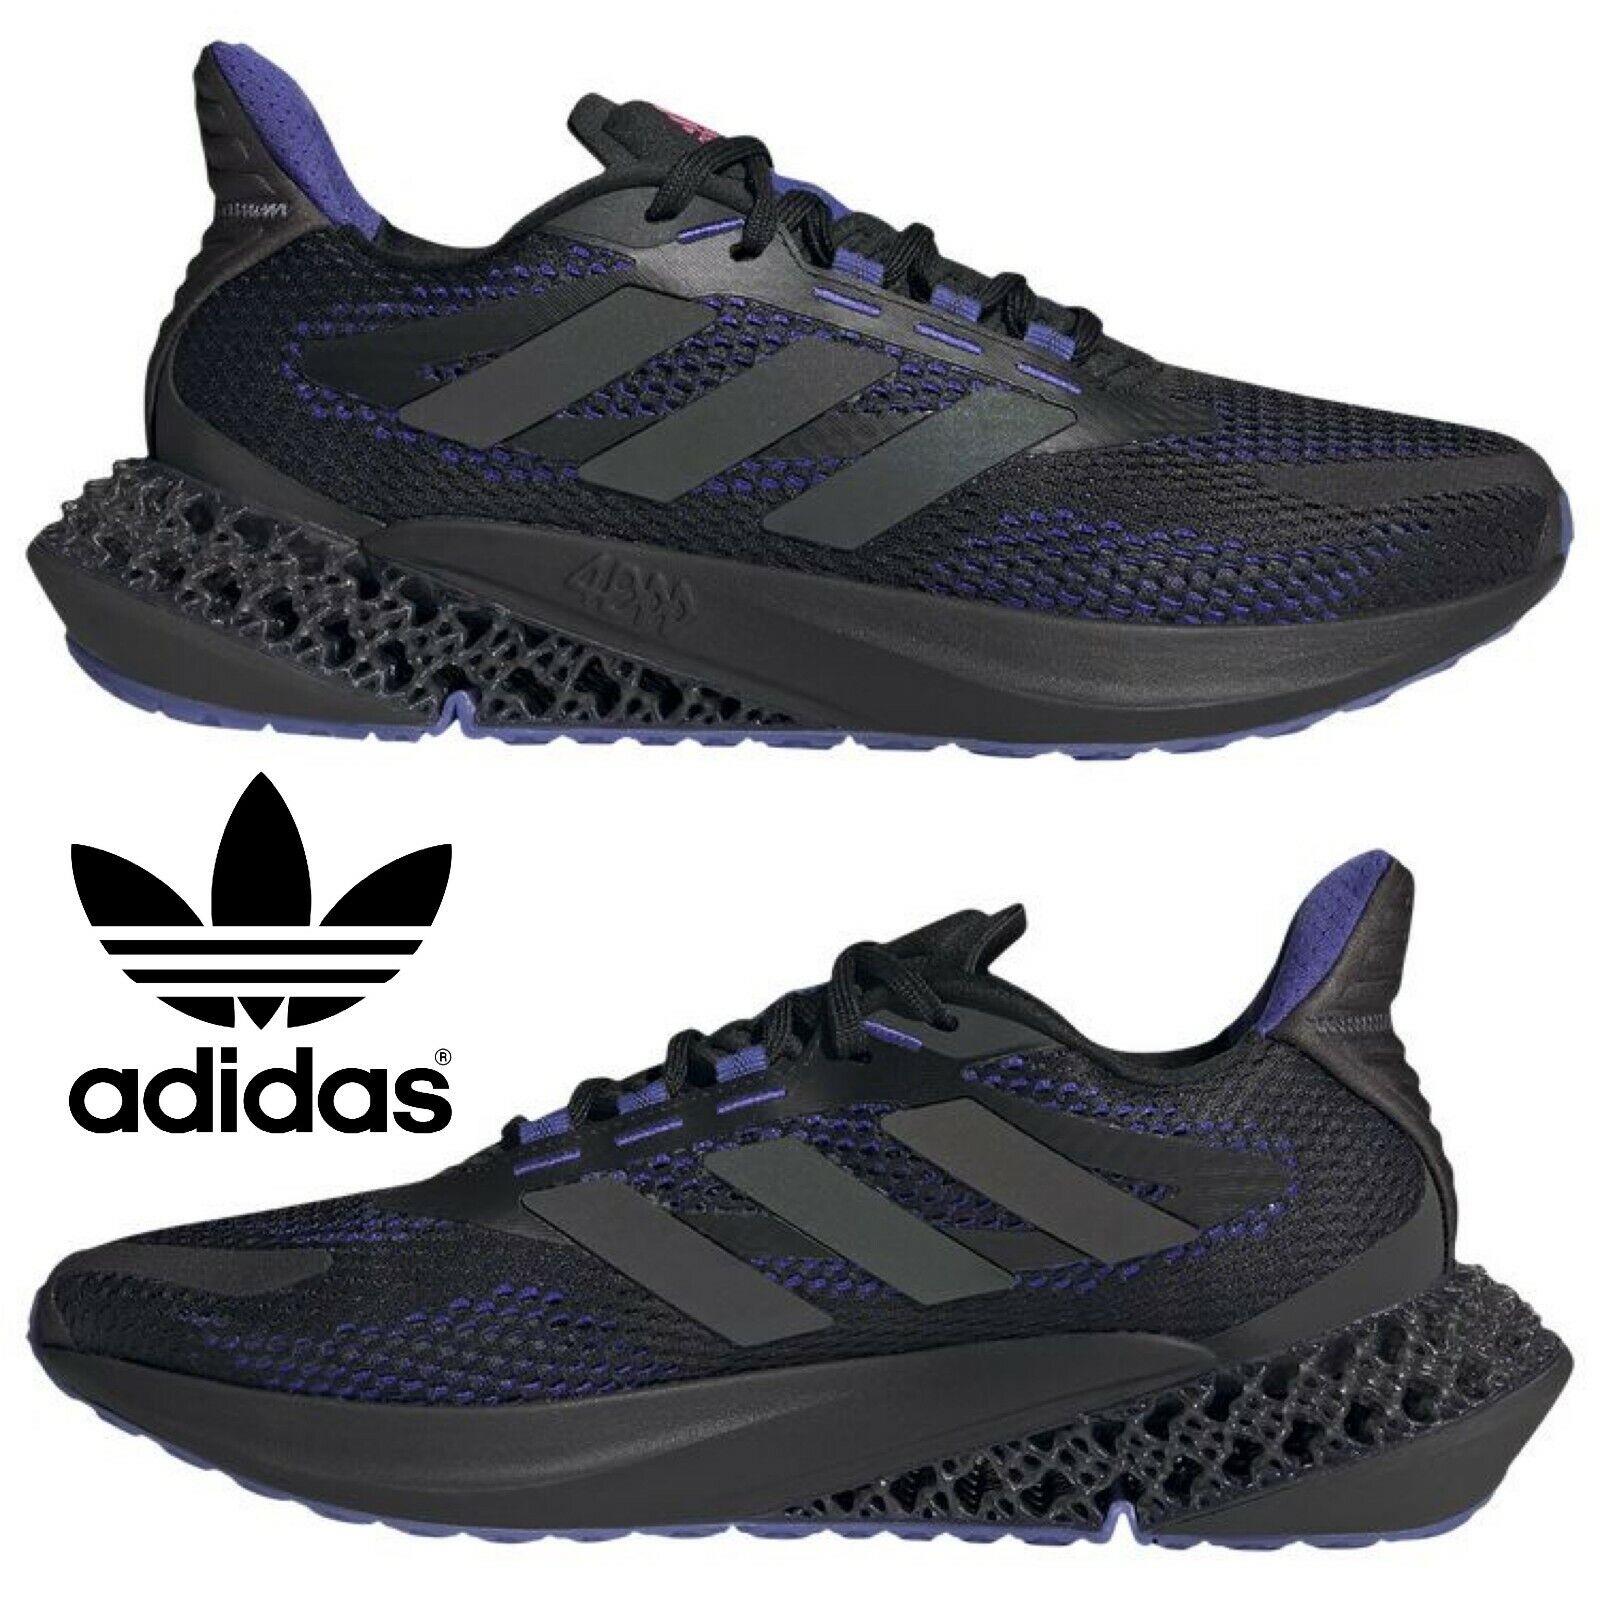 Adidas 4DFWD Kick Men`s Sneakers Running Shoes Gym Casual Comfort Sport Black